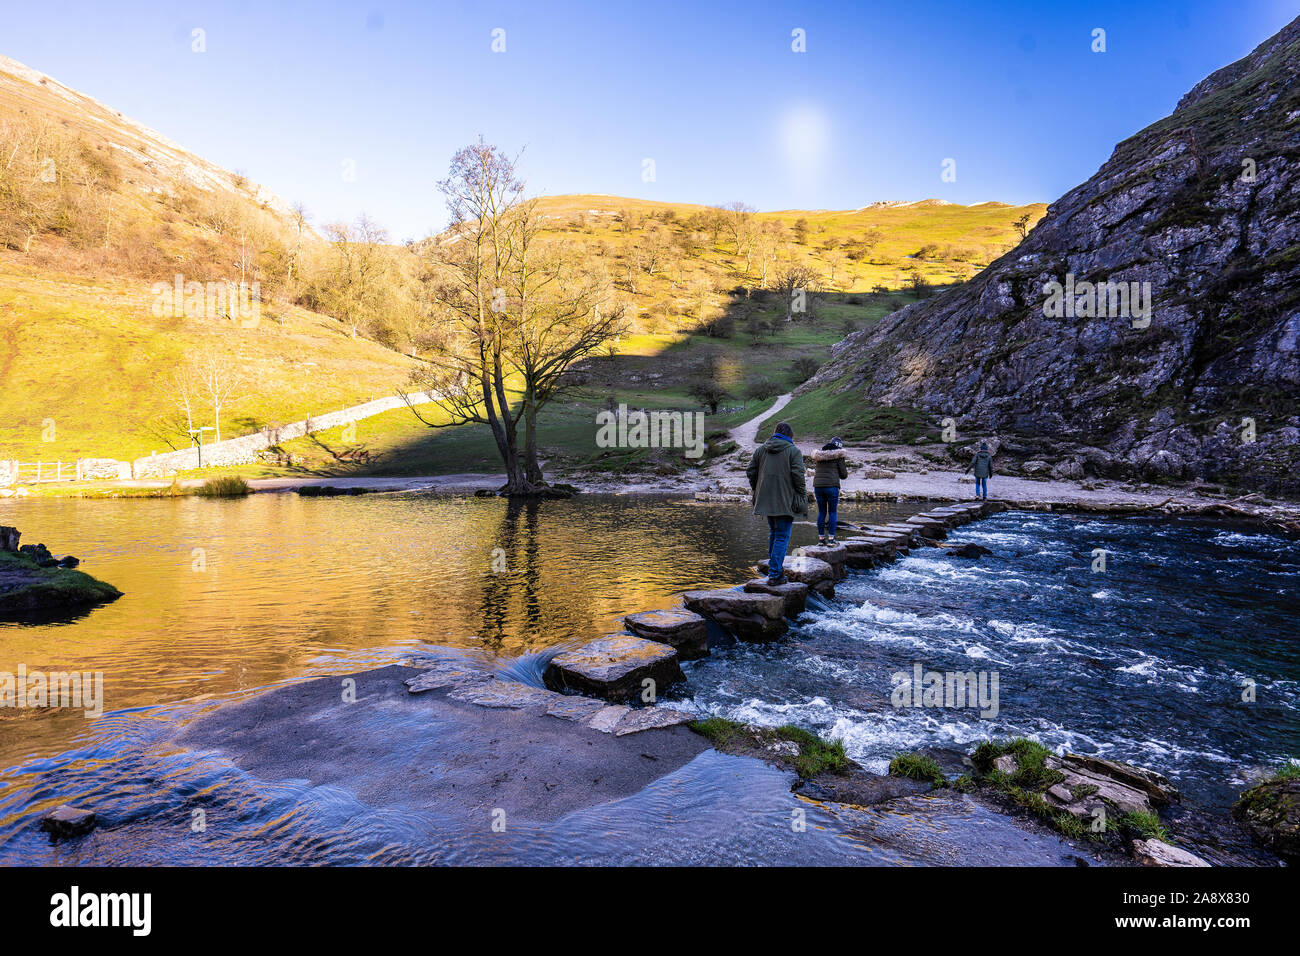 People enjoy a day out at the famous Dovedale stepping stones in the Derbyshire Peak District National Park, part of the National trust Stock Photo